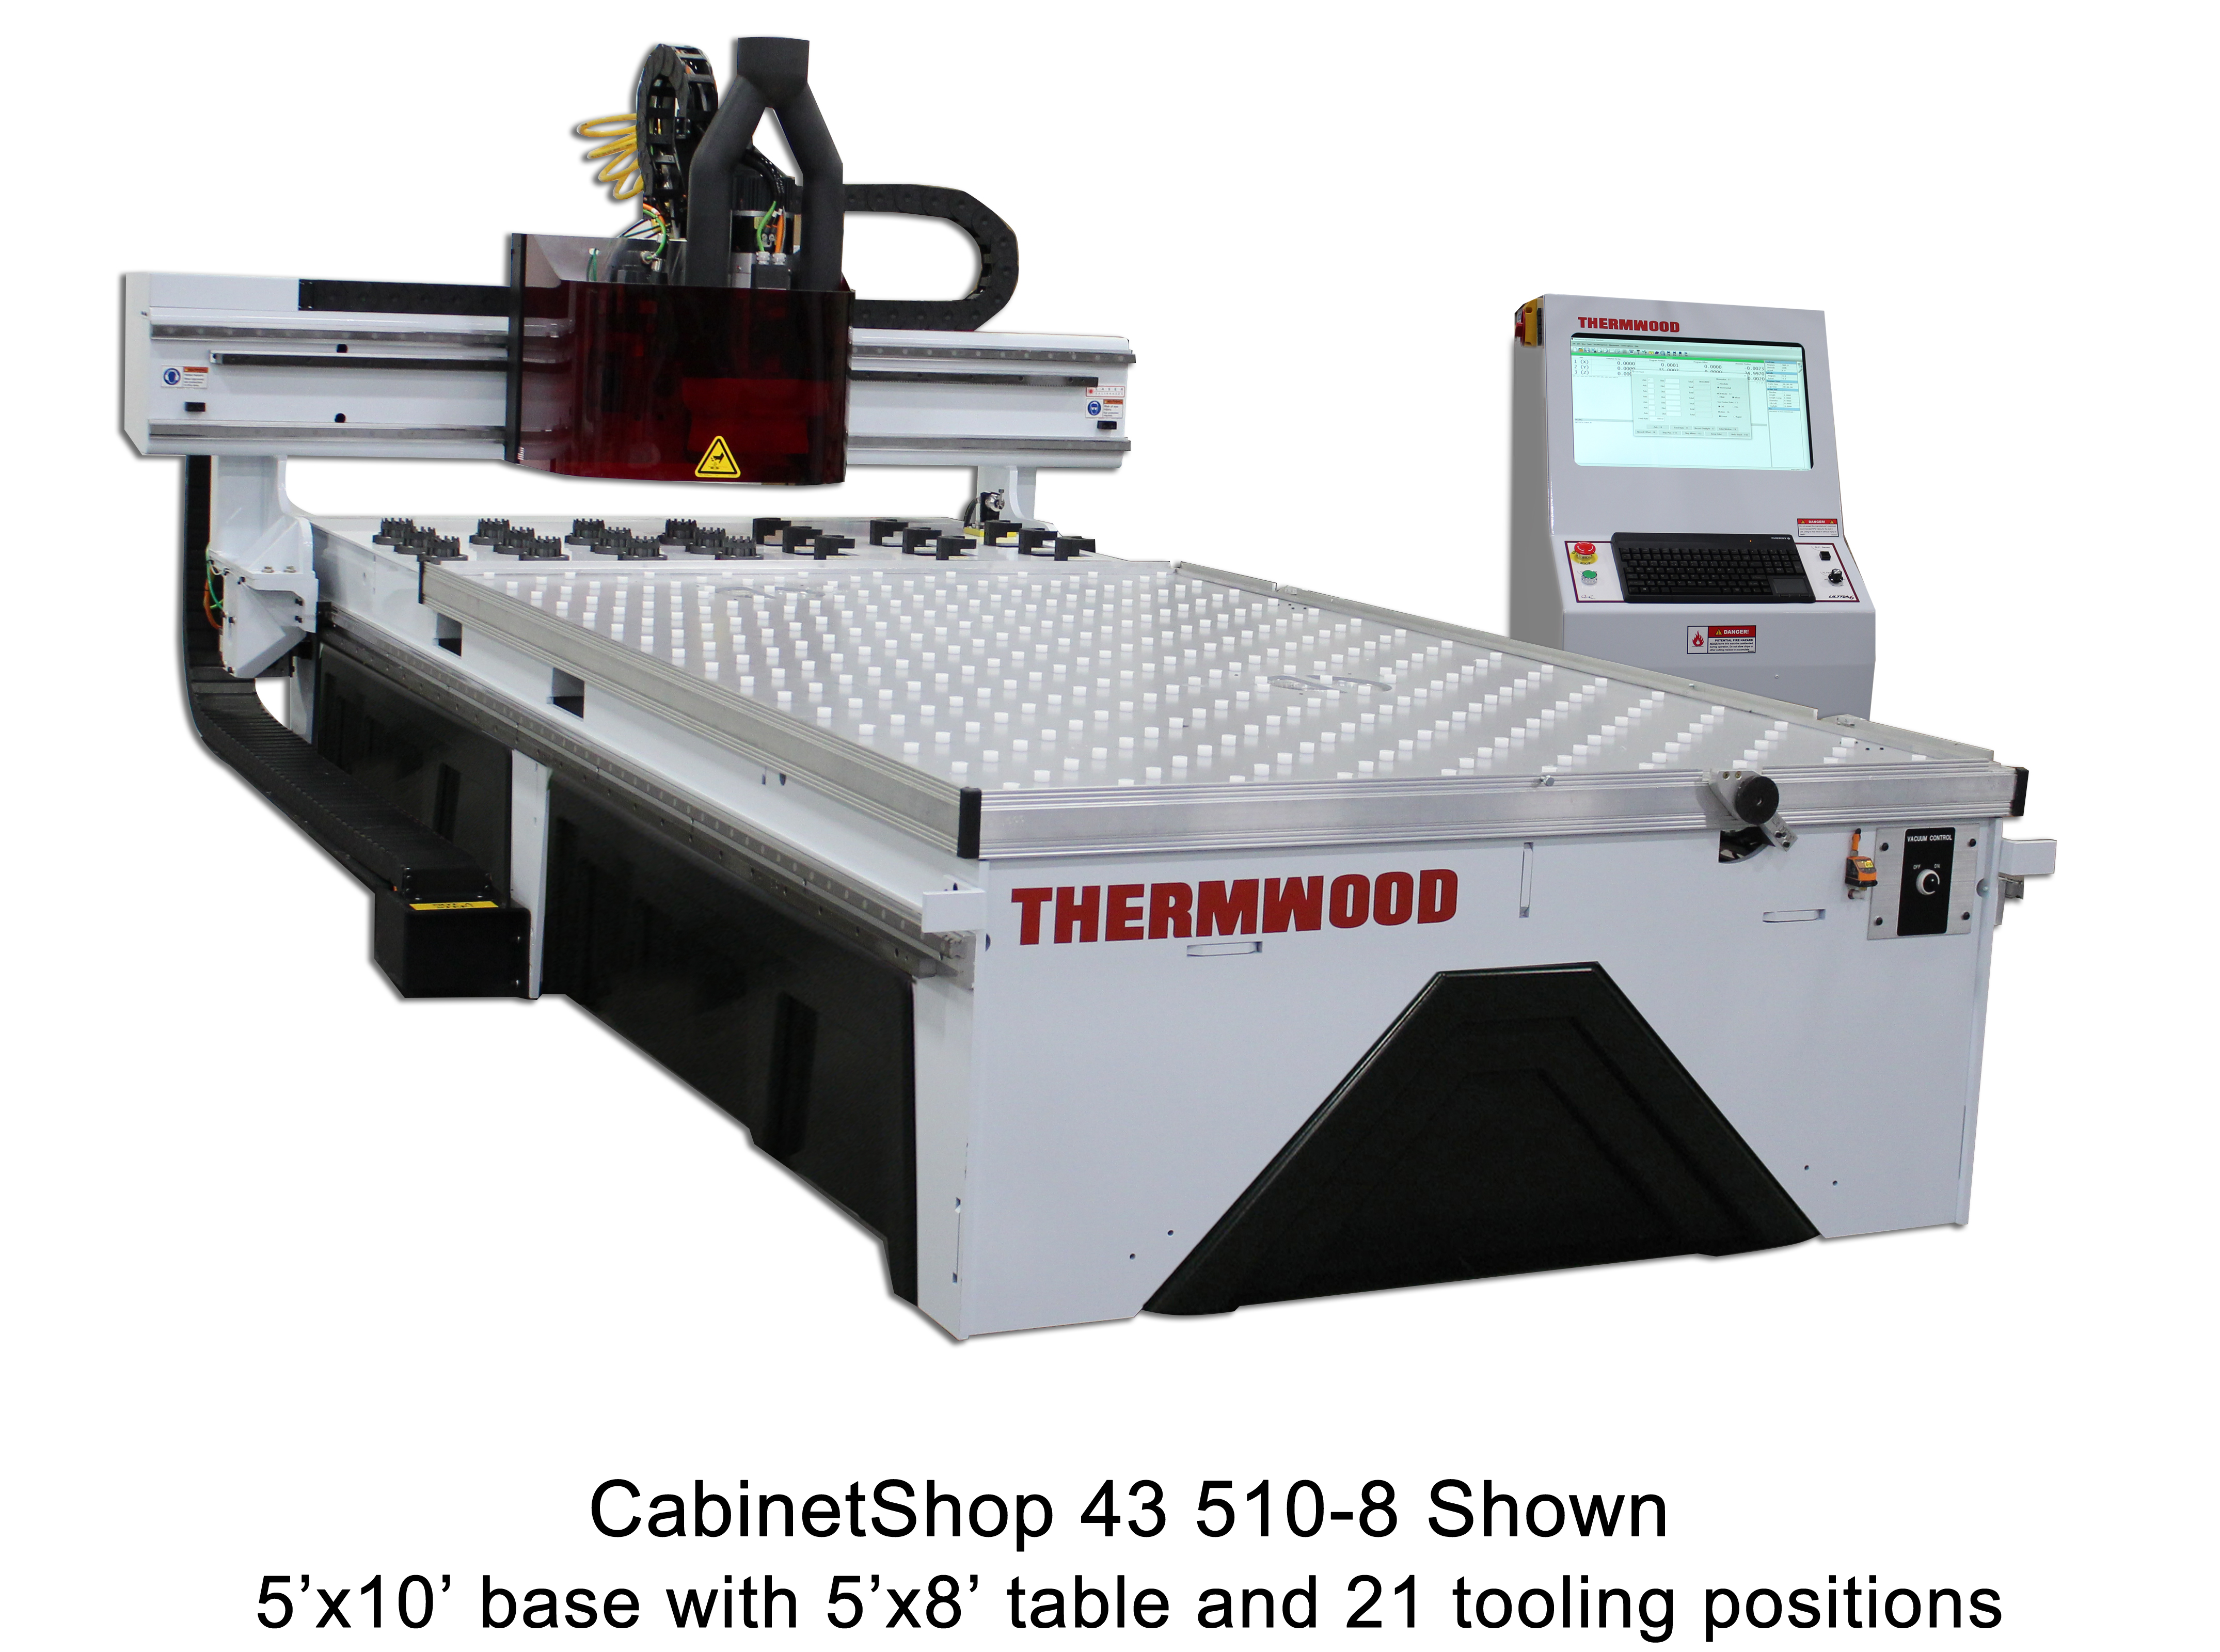 CabinetShop 43 510-8 Shown with 5'x8' table on 5'x10' base with 21 tooling positions